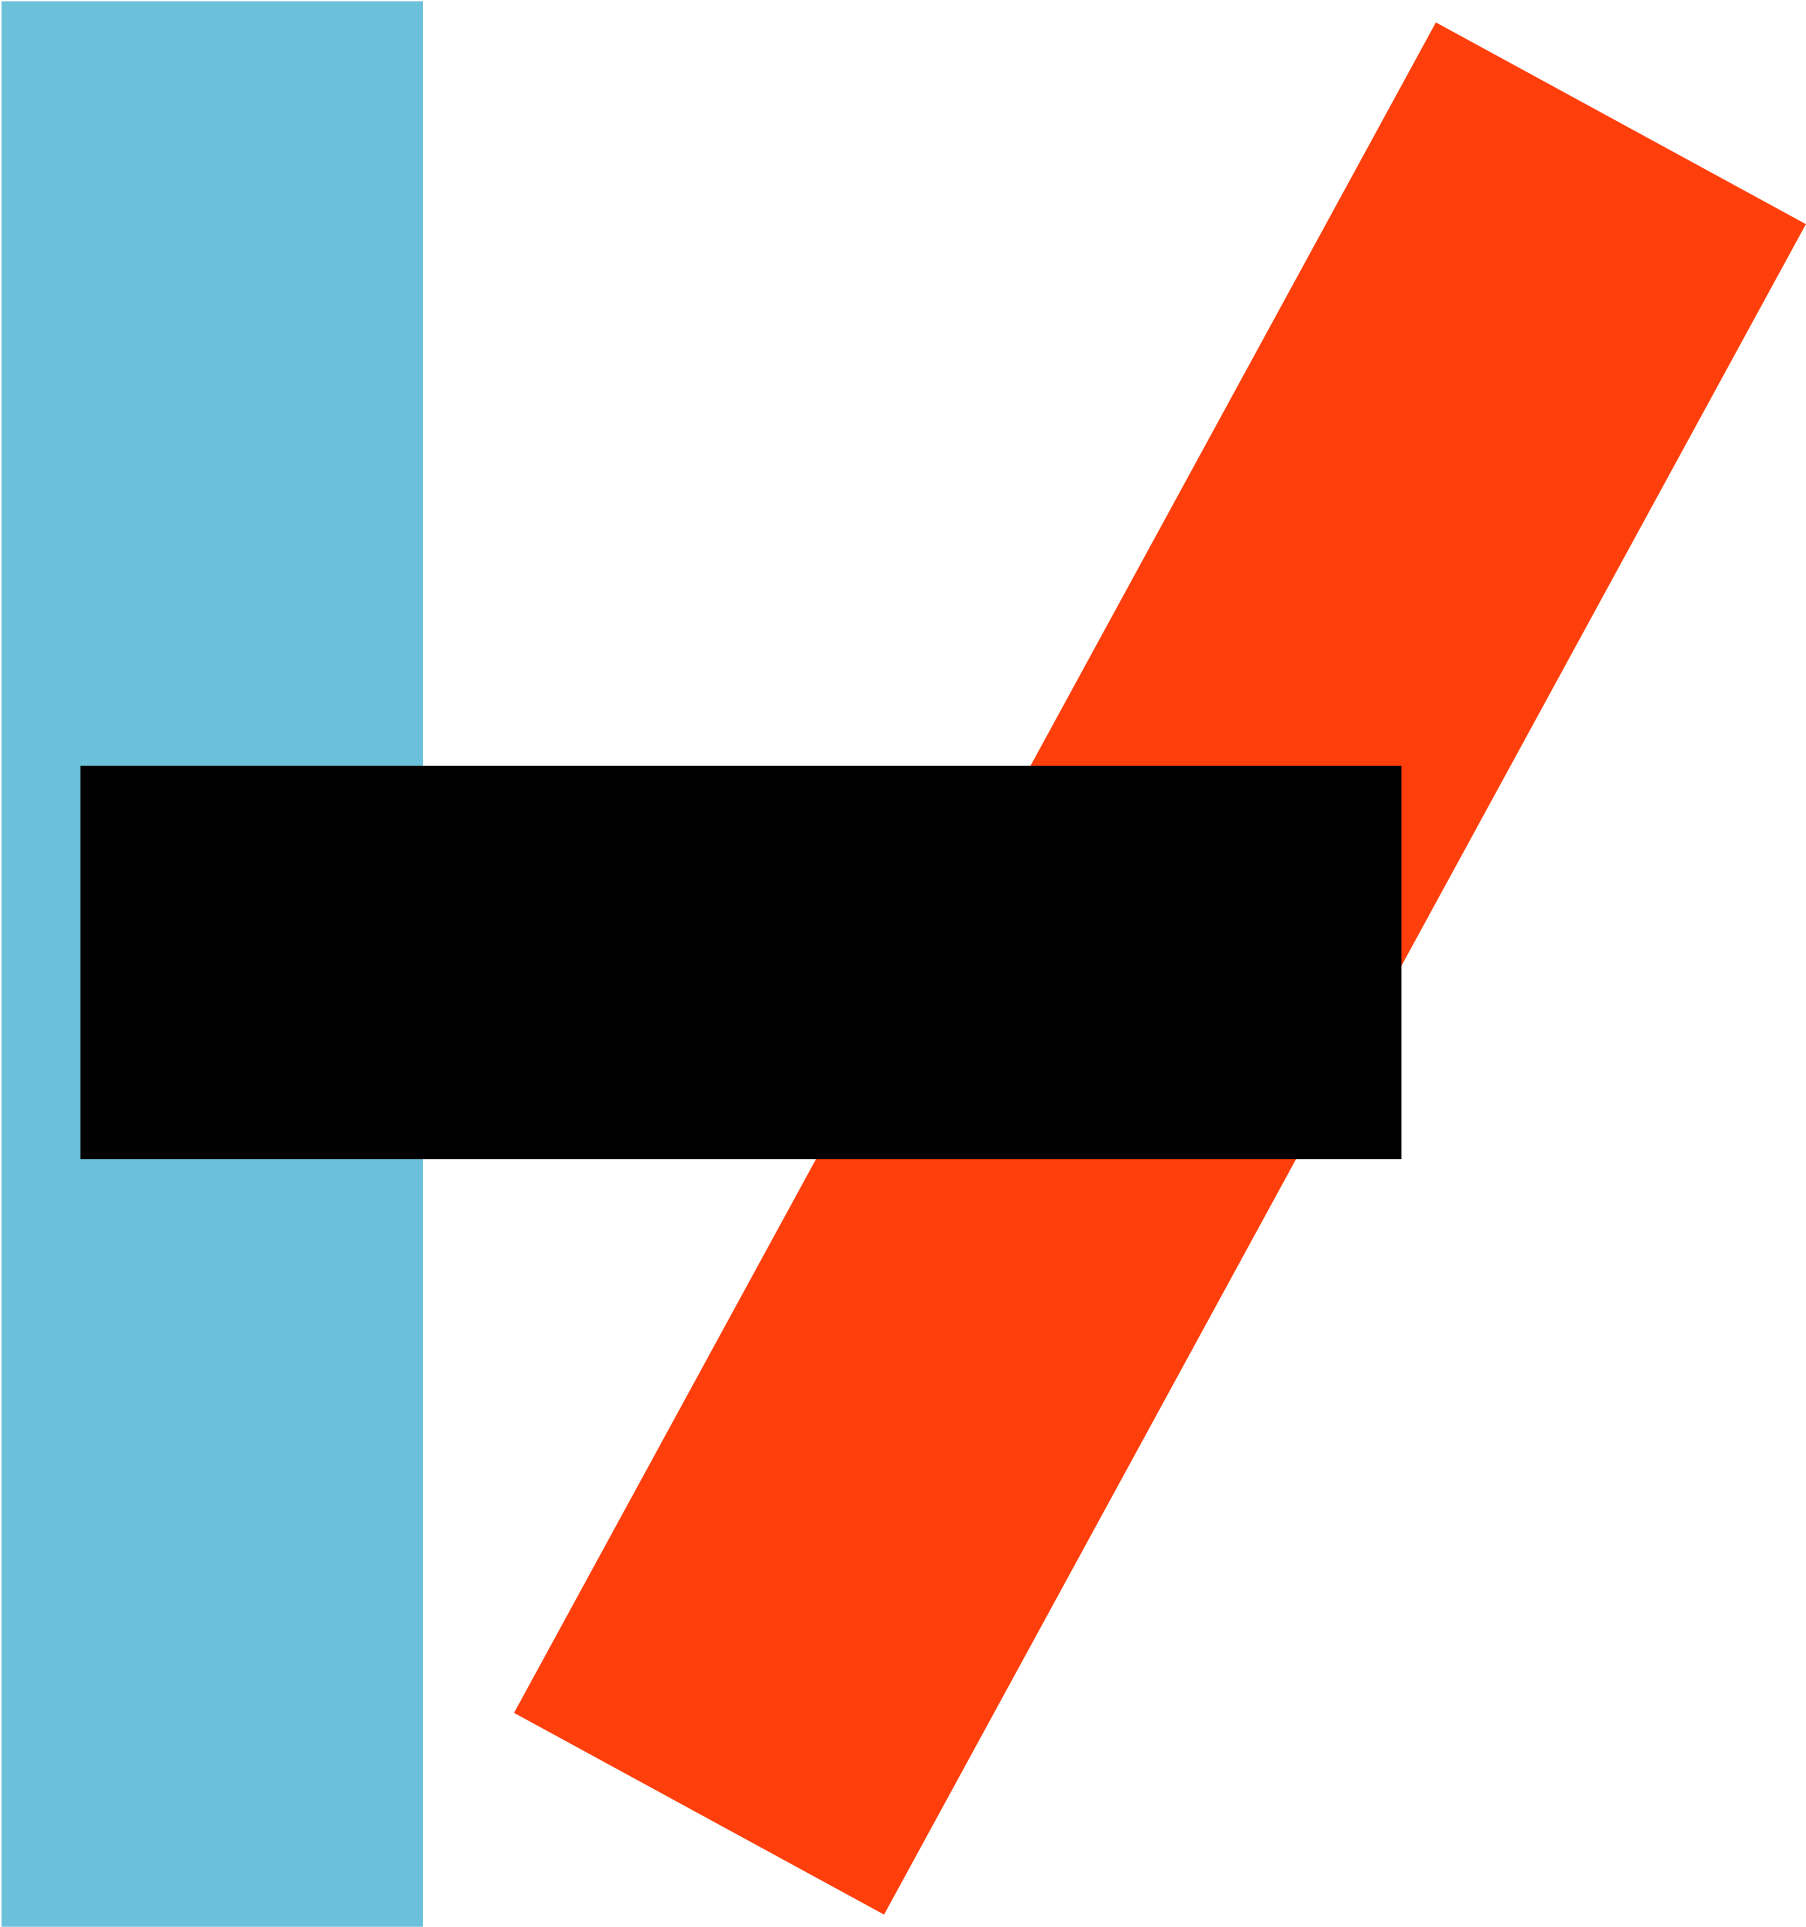 A Blue And Black Rectangles With A Red Rectangle